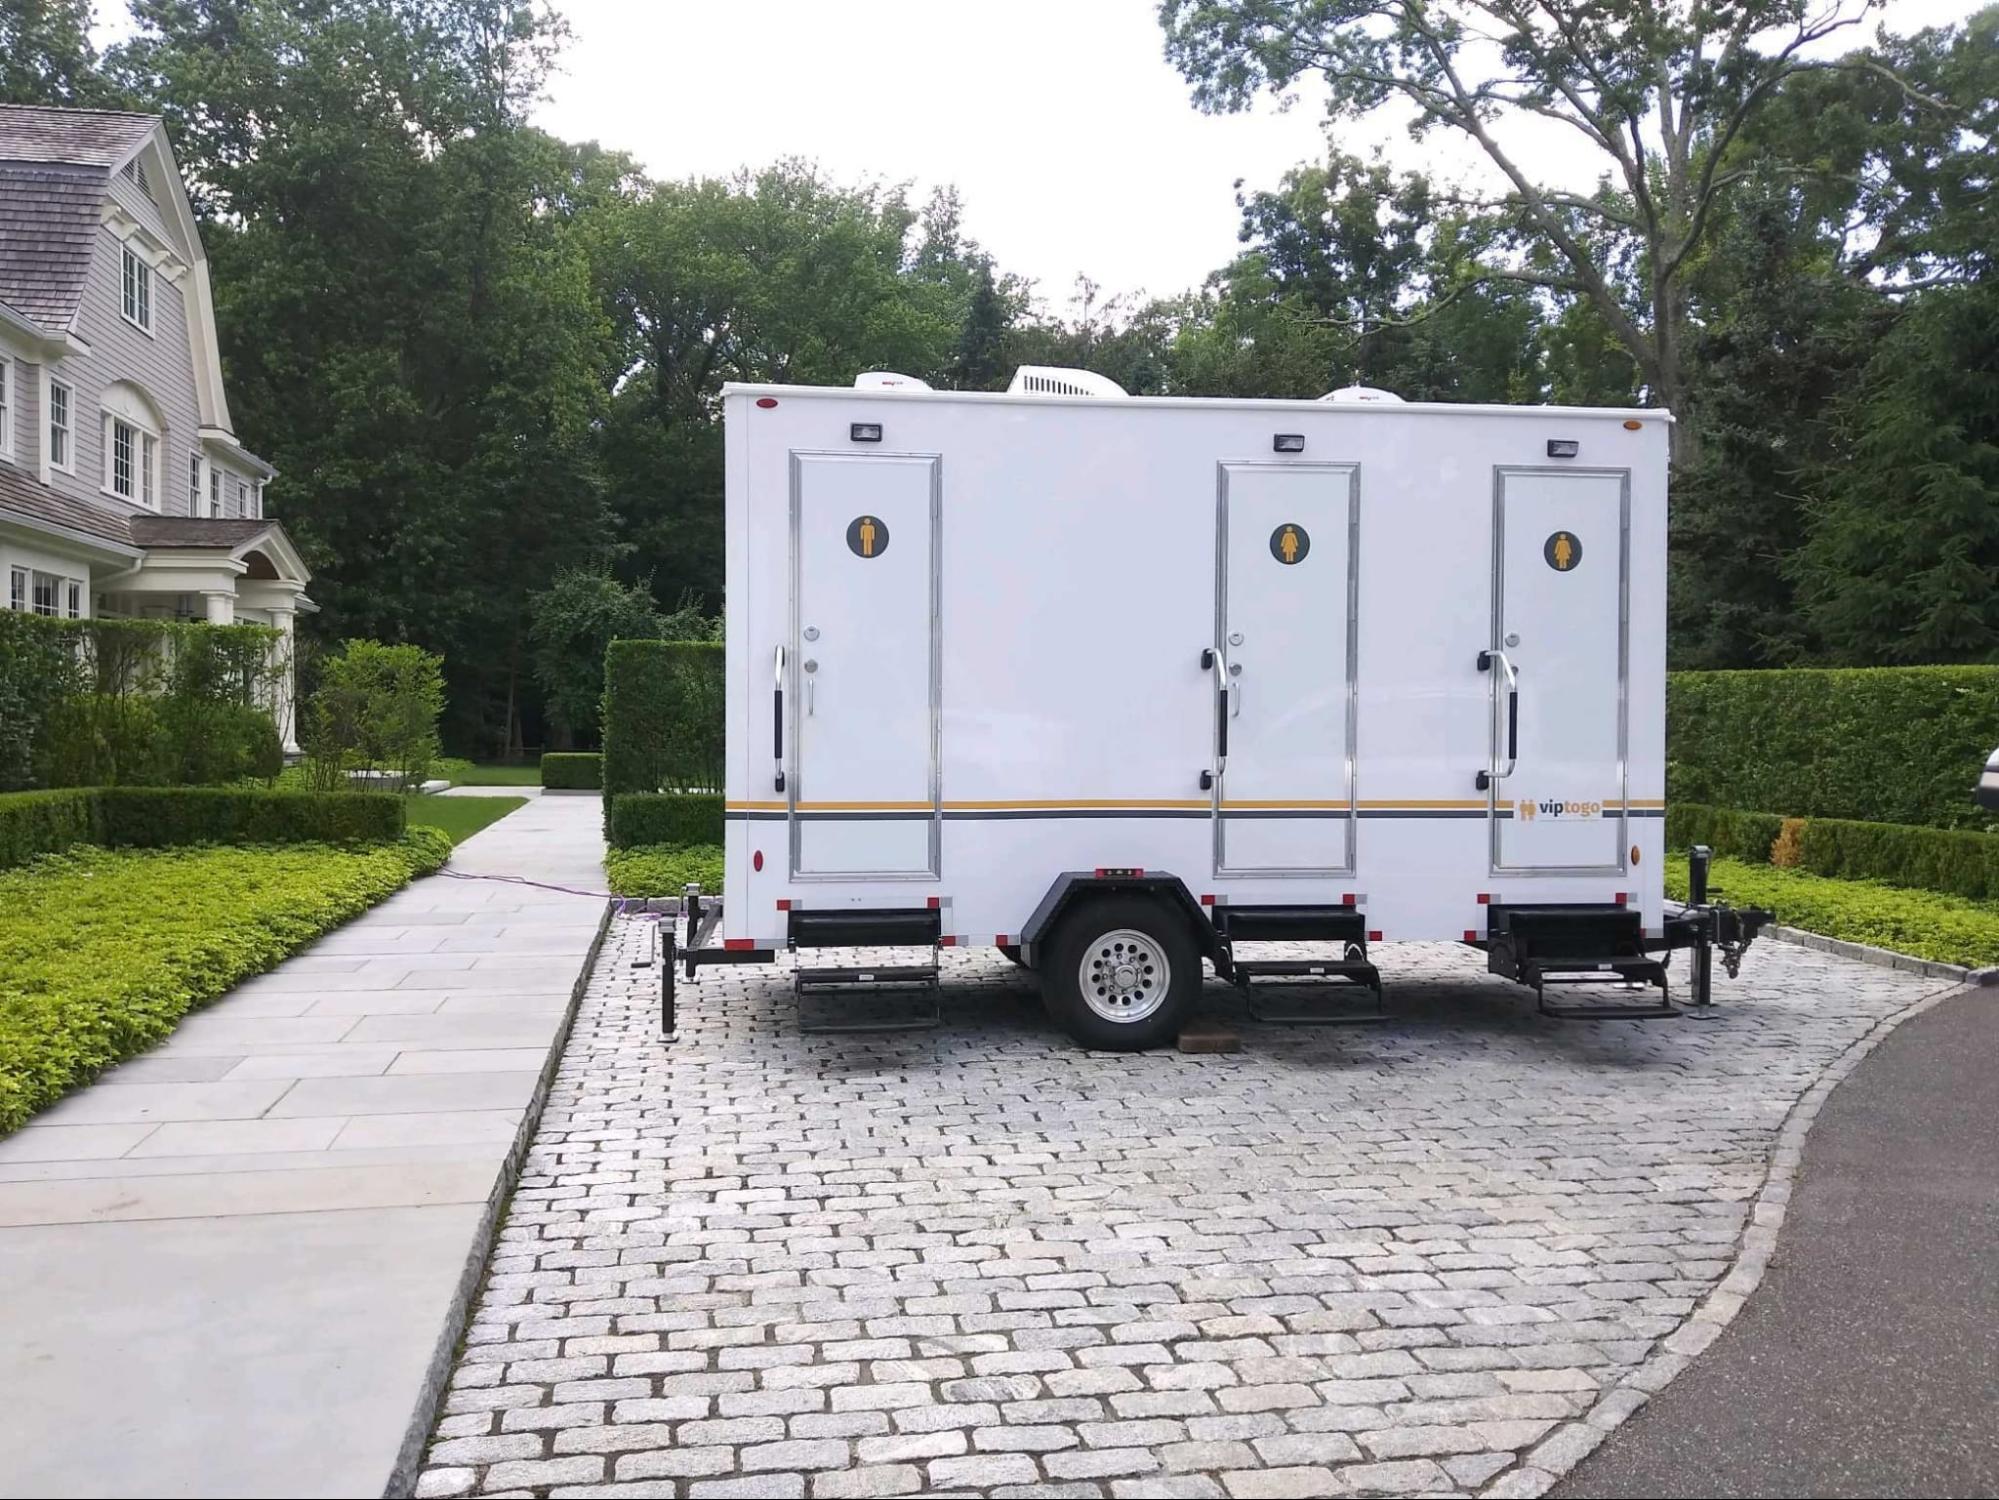 wedding restroom trailer to accommodate wedding schedule and guests